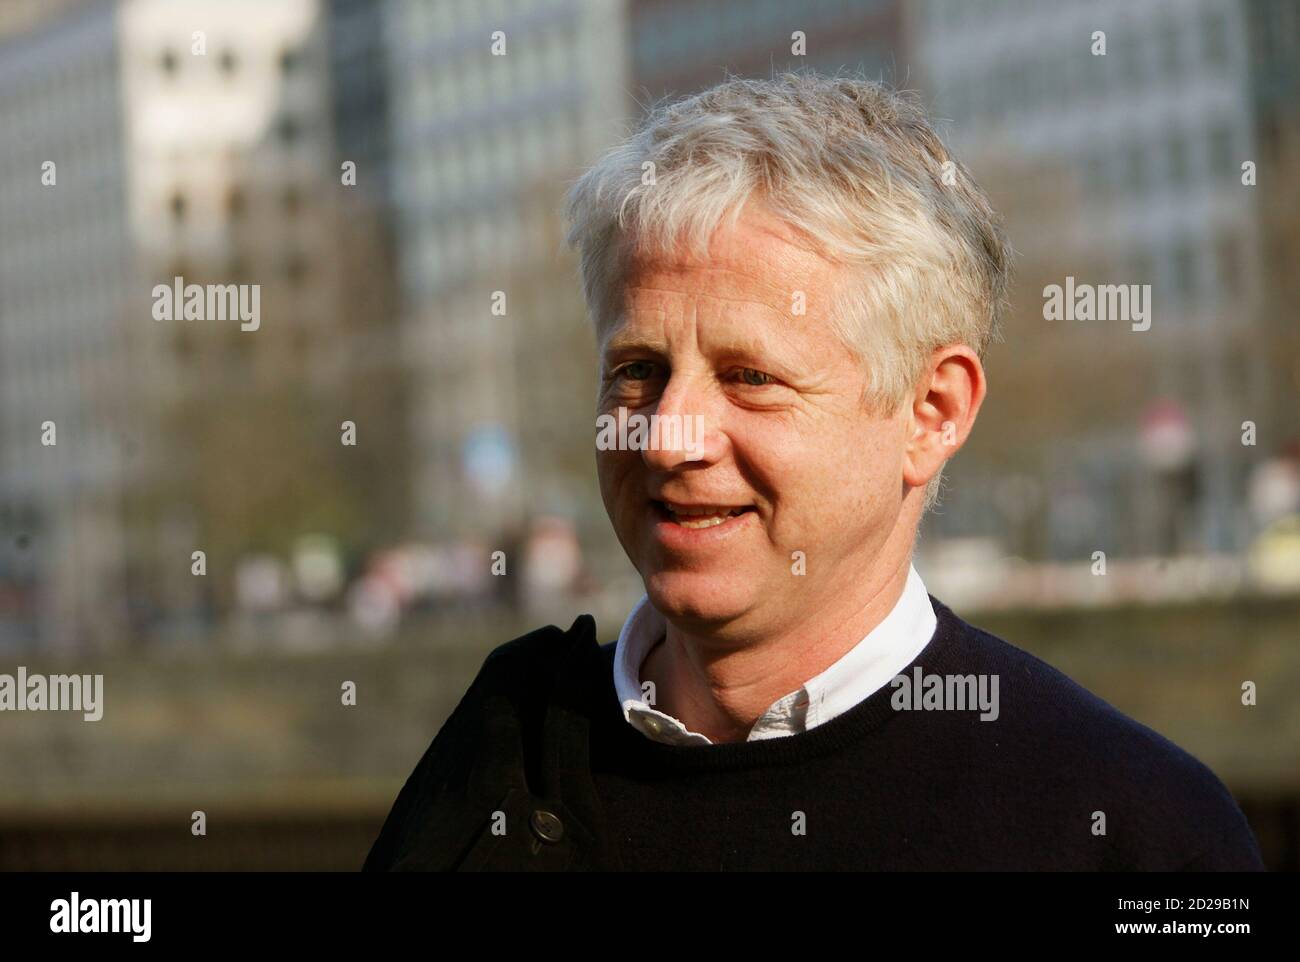 Director Richard Curtis leaves a photo call to promote his new movie "Radio  Rock Revolution" in Berlin April 7, 2009. REUTERS/Hannibal Hanschke  (GERMANY ENTERTAINMENT Stock Photo - Alamy